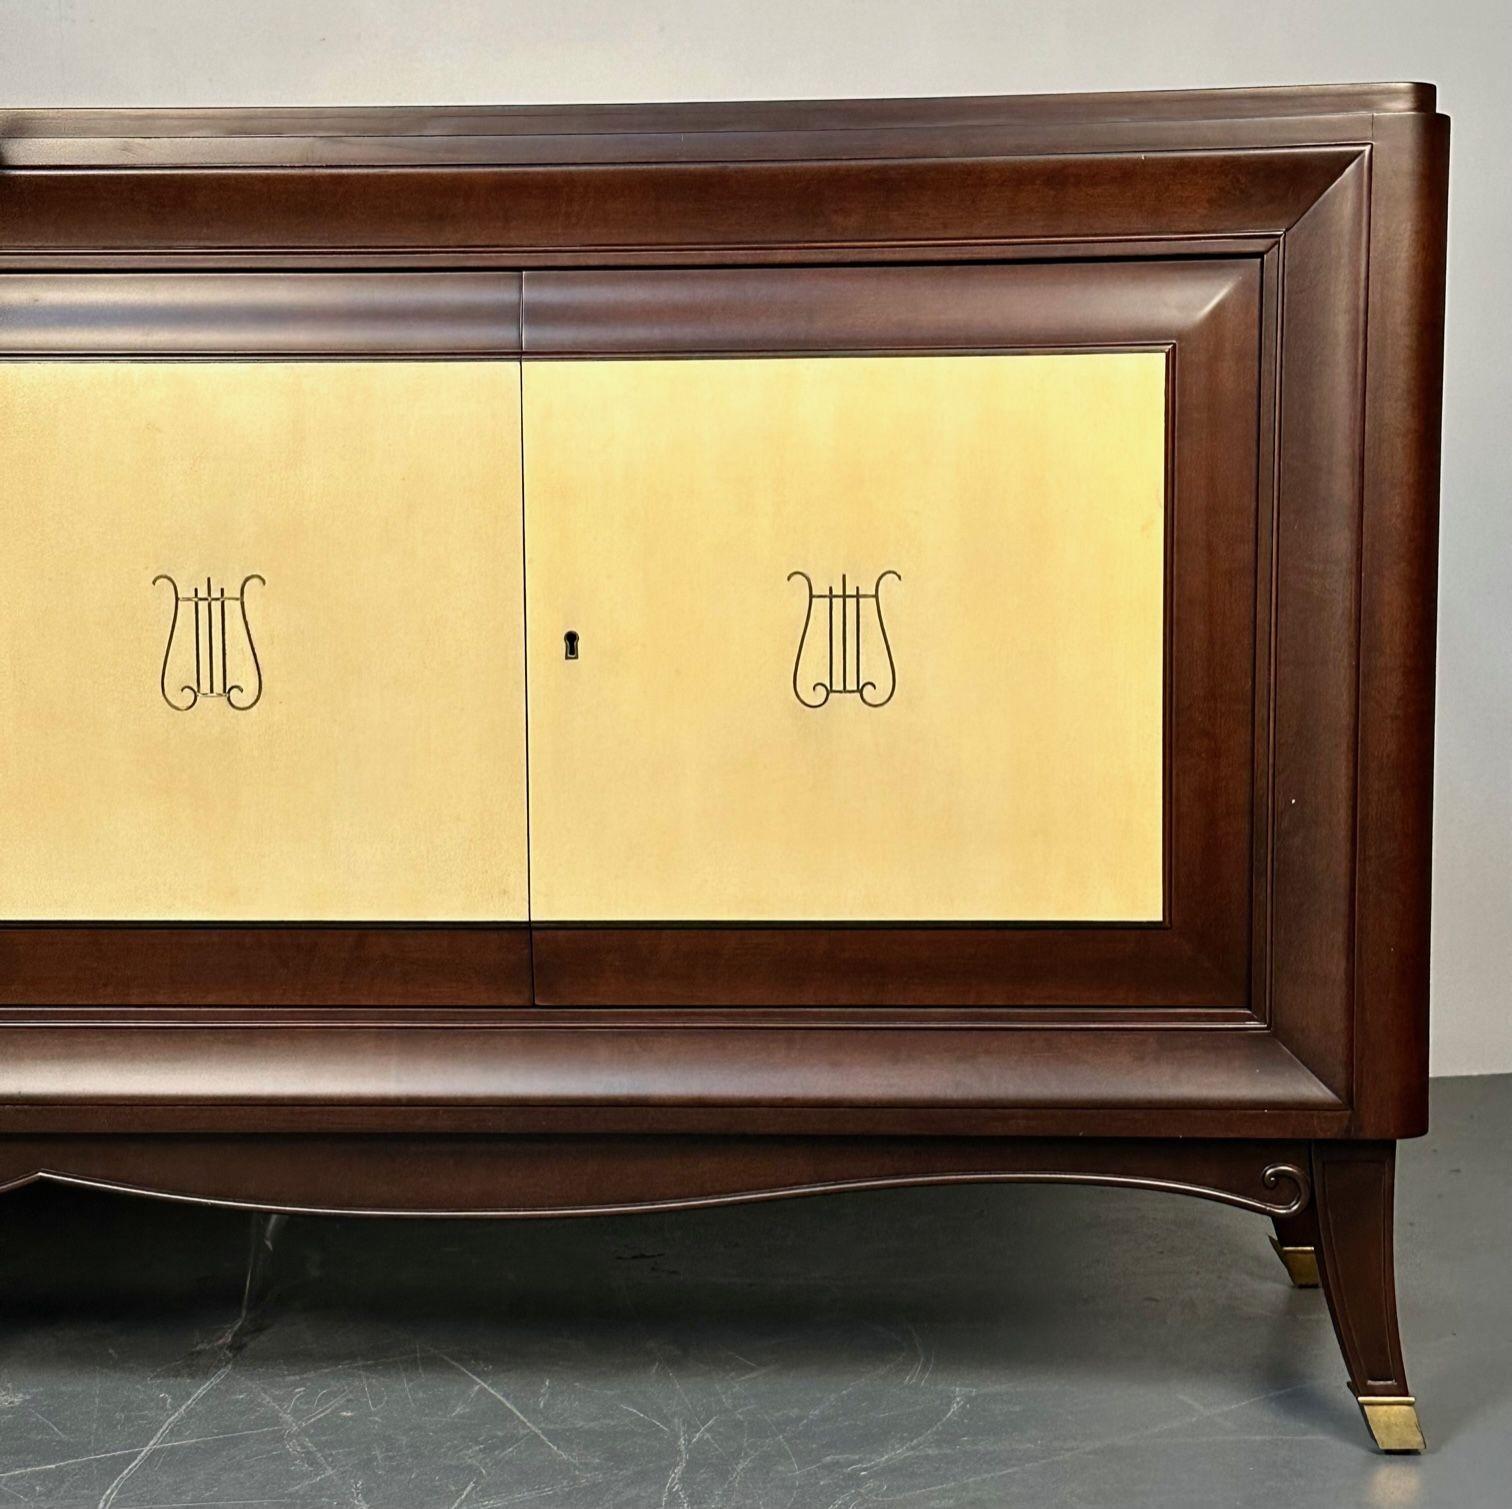 Italian Midcentury Sideboard / Credenza / Cabinet, Parchment, Mahogany, 1950s For Sale 4